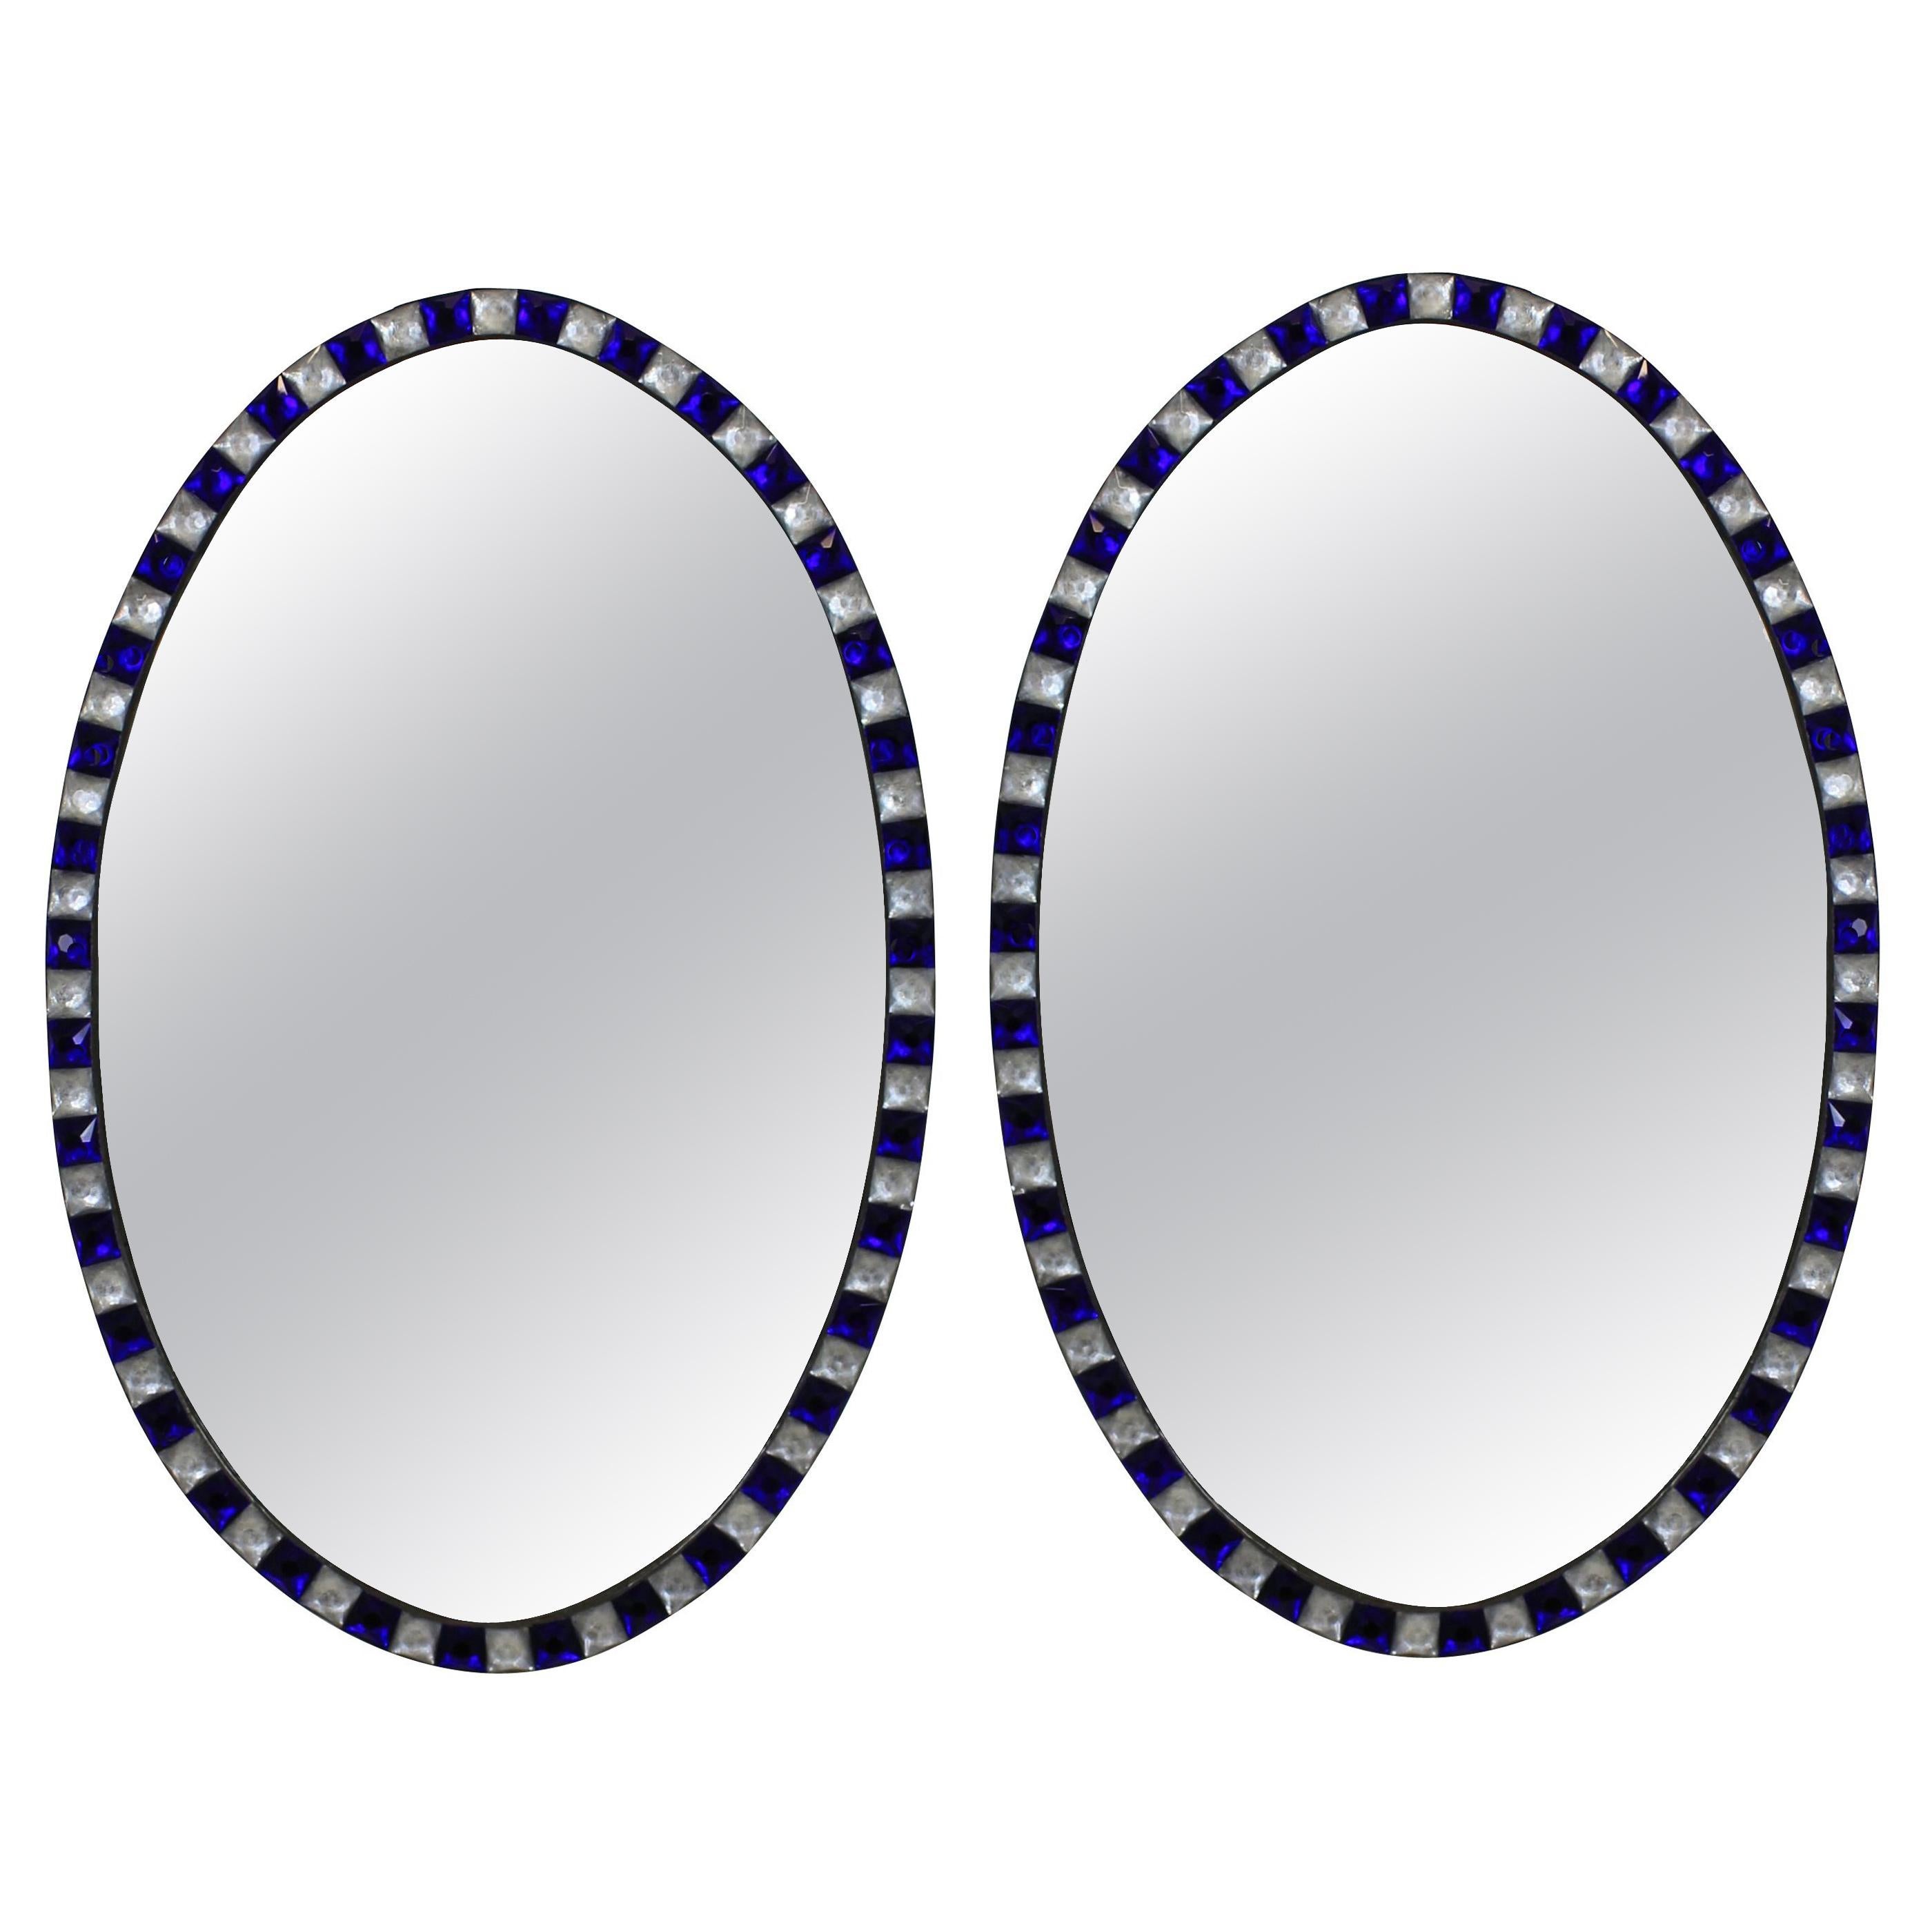 Pair of Stunning Irish Mirrors with Faceted Rock Crystal and Blu Glass Borders